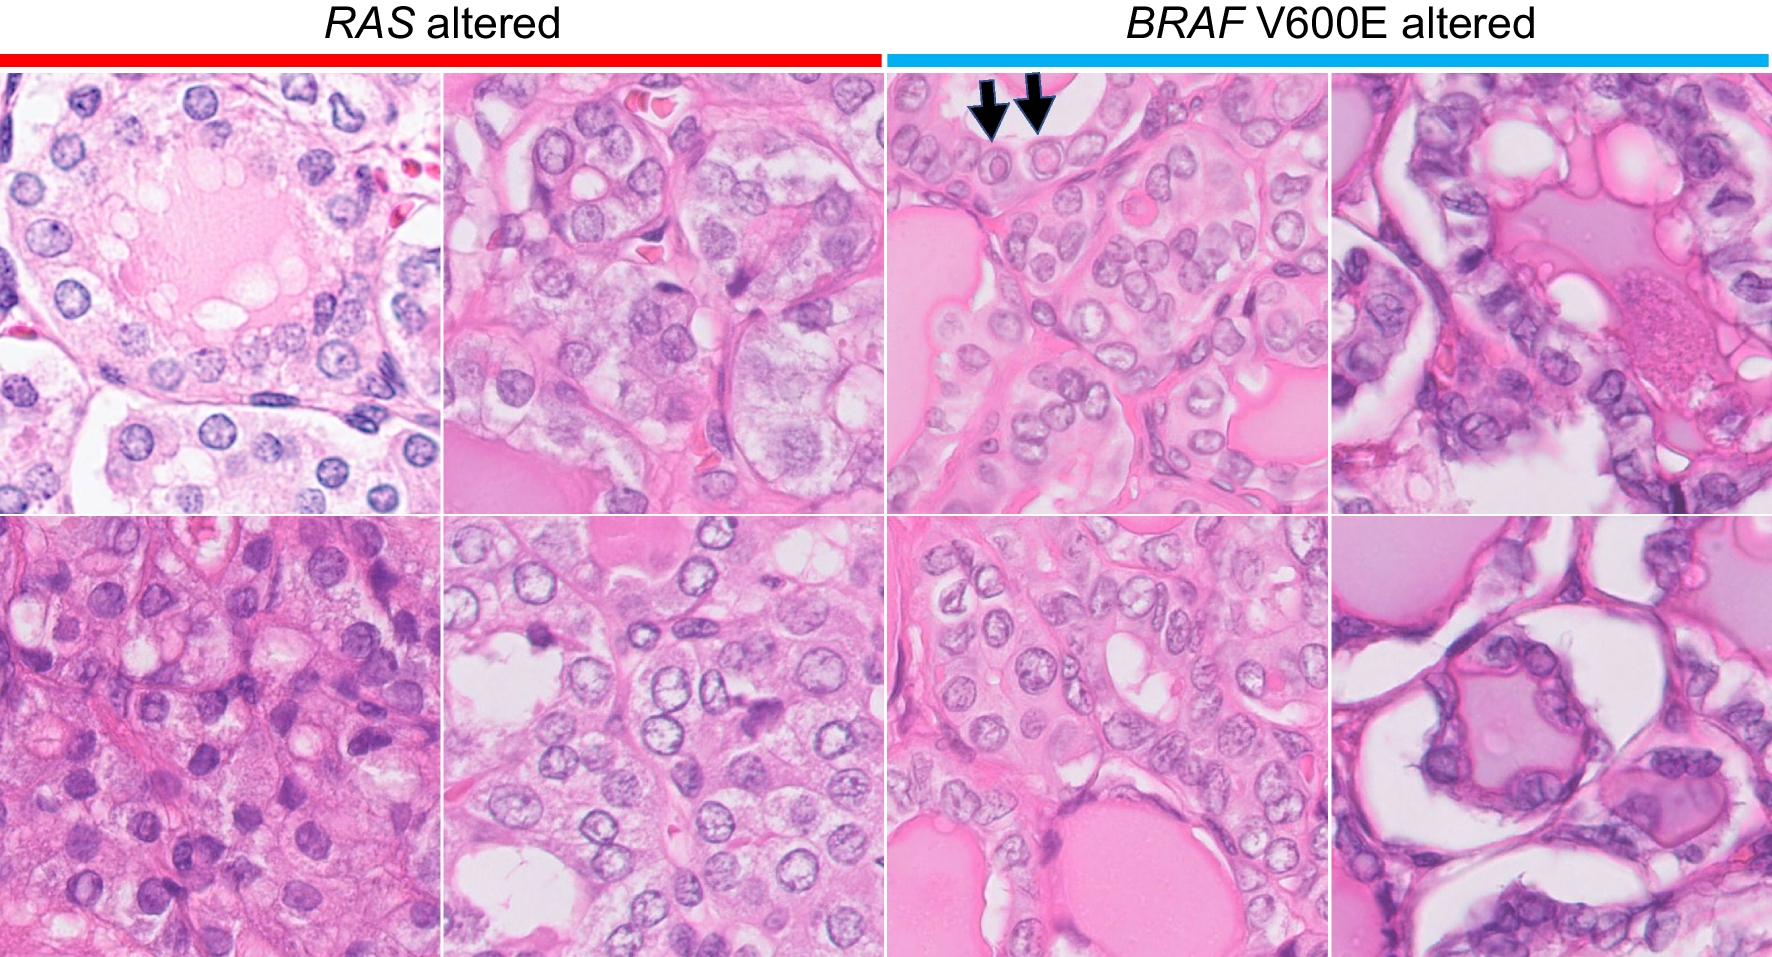 Differentiating BRAF V600E- and RAS-like alterations in encapsulated follicular patterned tumors through histologic features: a validation study